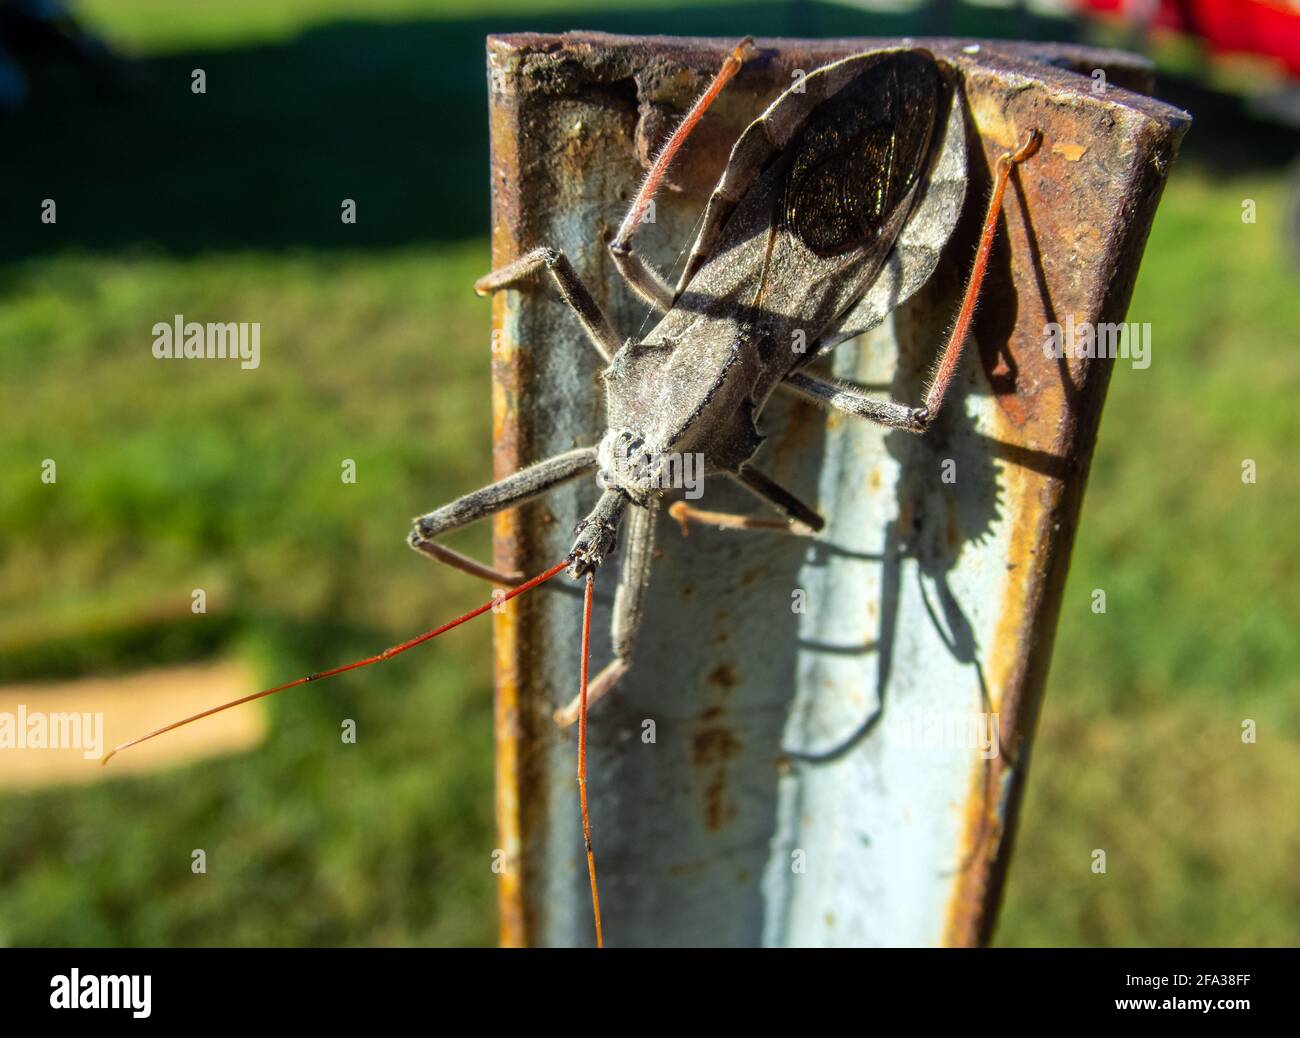 A close up look at a 3-segmented, long narrow headed, round beady eyed, prey killing wheel bug. Its pointed mouthpart and needle-like beak can inflict Stock Photo